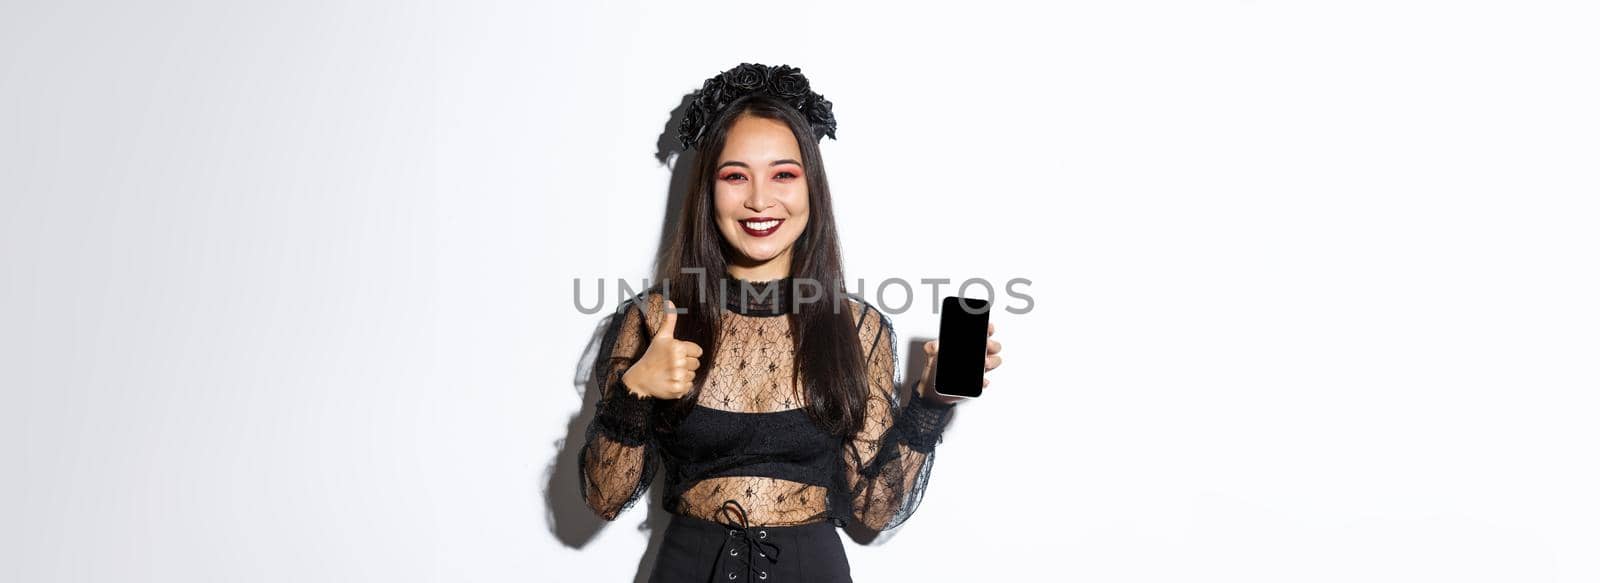 Image of happy and satisfied asian woman in halloween costume showing thumbs-up and demonstrating mobile phone screen, smiling pleased, standing over white background.